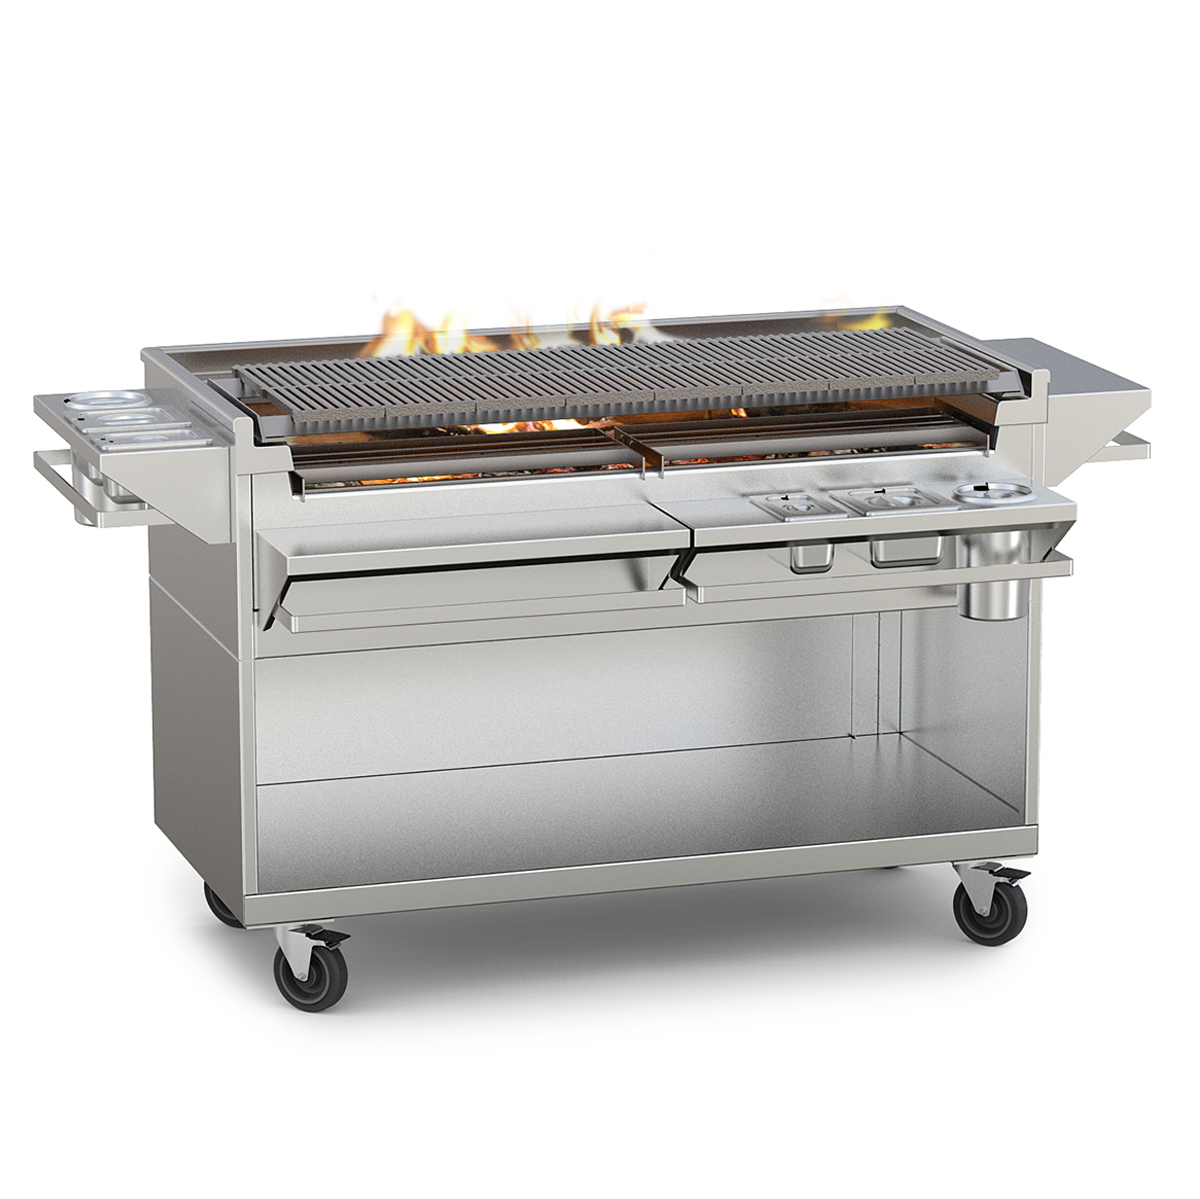 Wood Fire Grill - Ogilvie Group